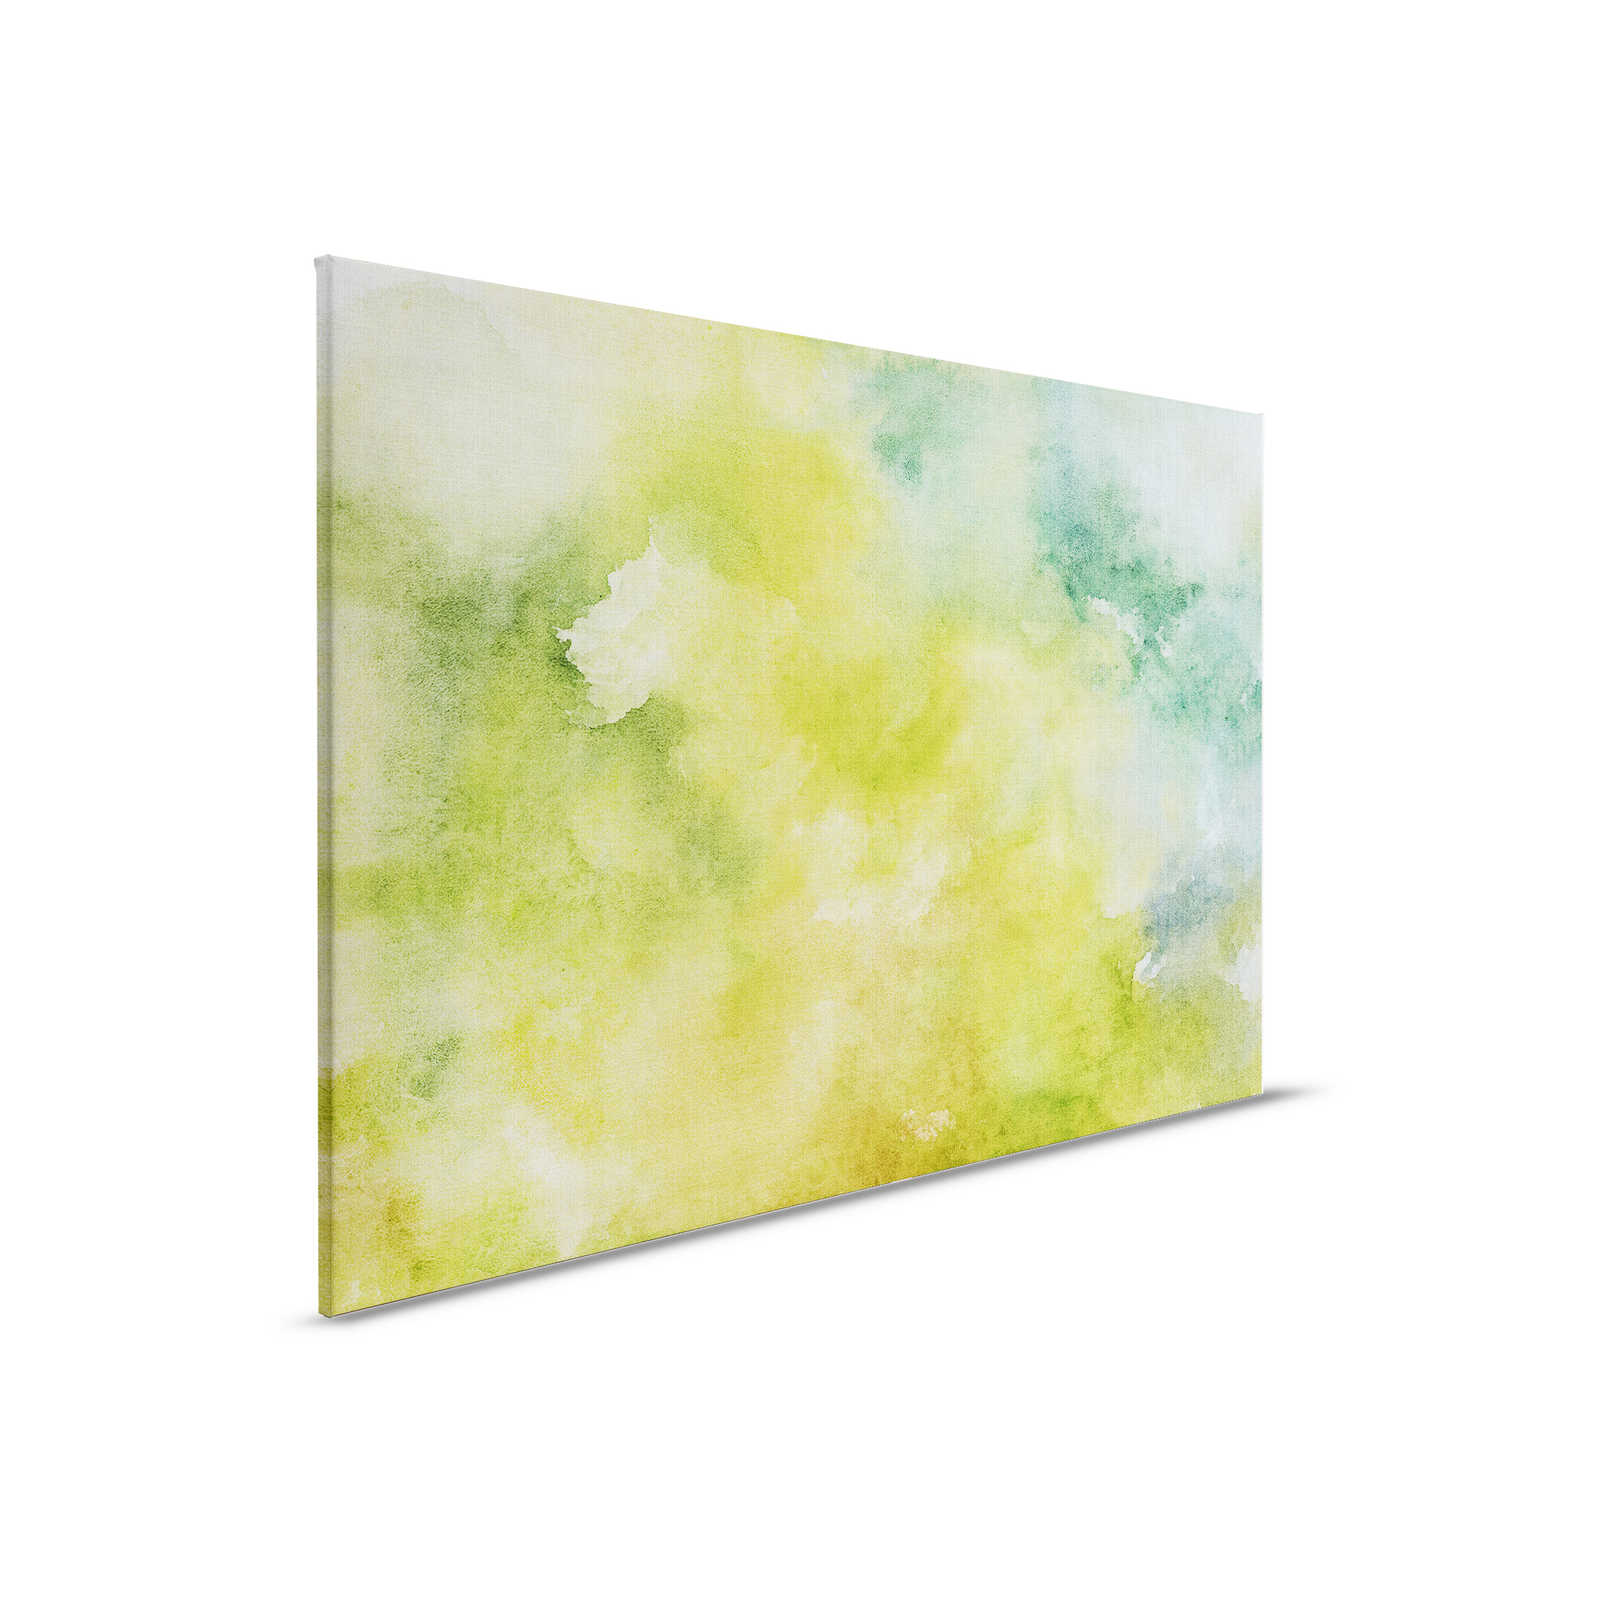 Watercolours 3 - Green watercolour motif as canvas picture in natural linen look - 0.90 m x 0.60 m
